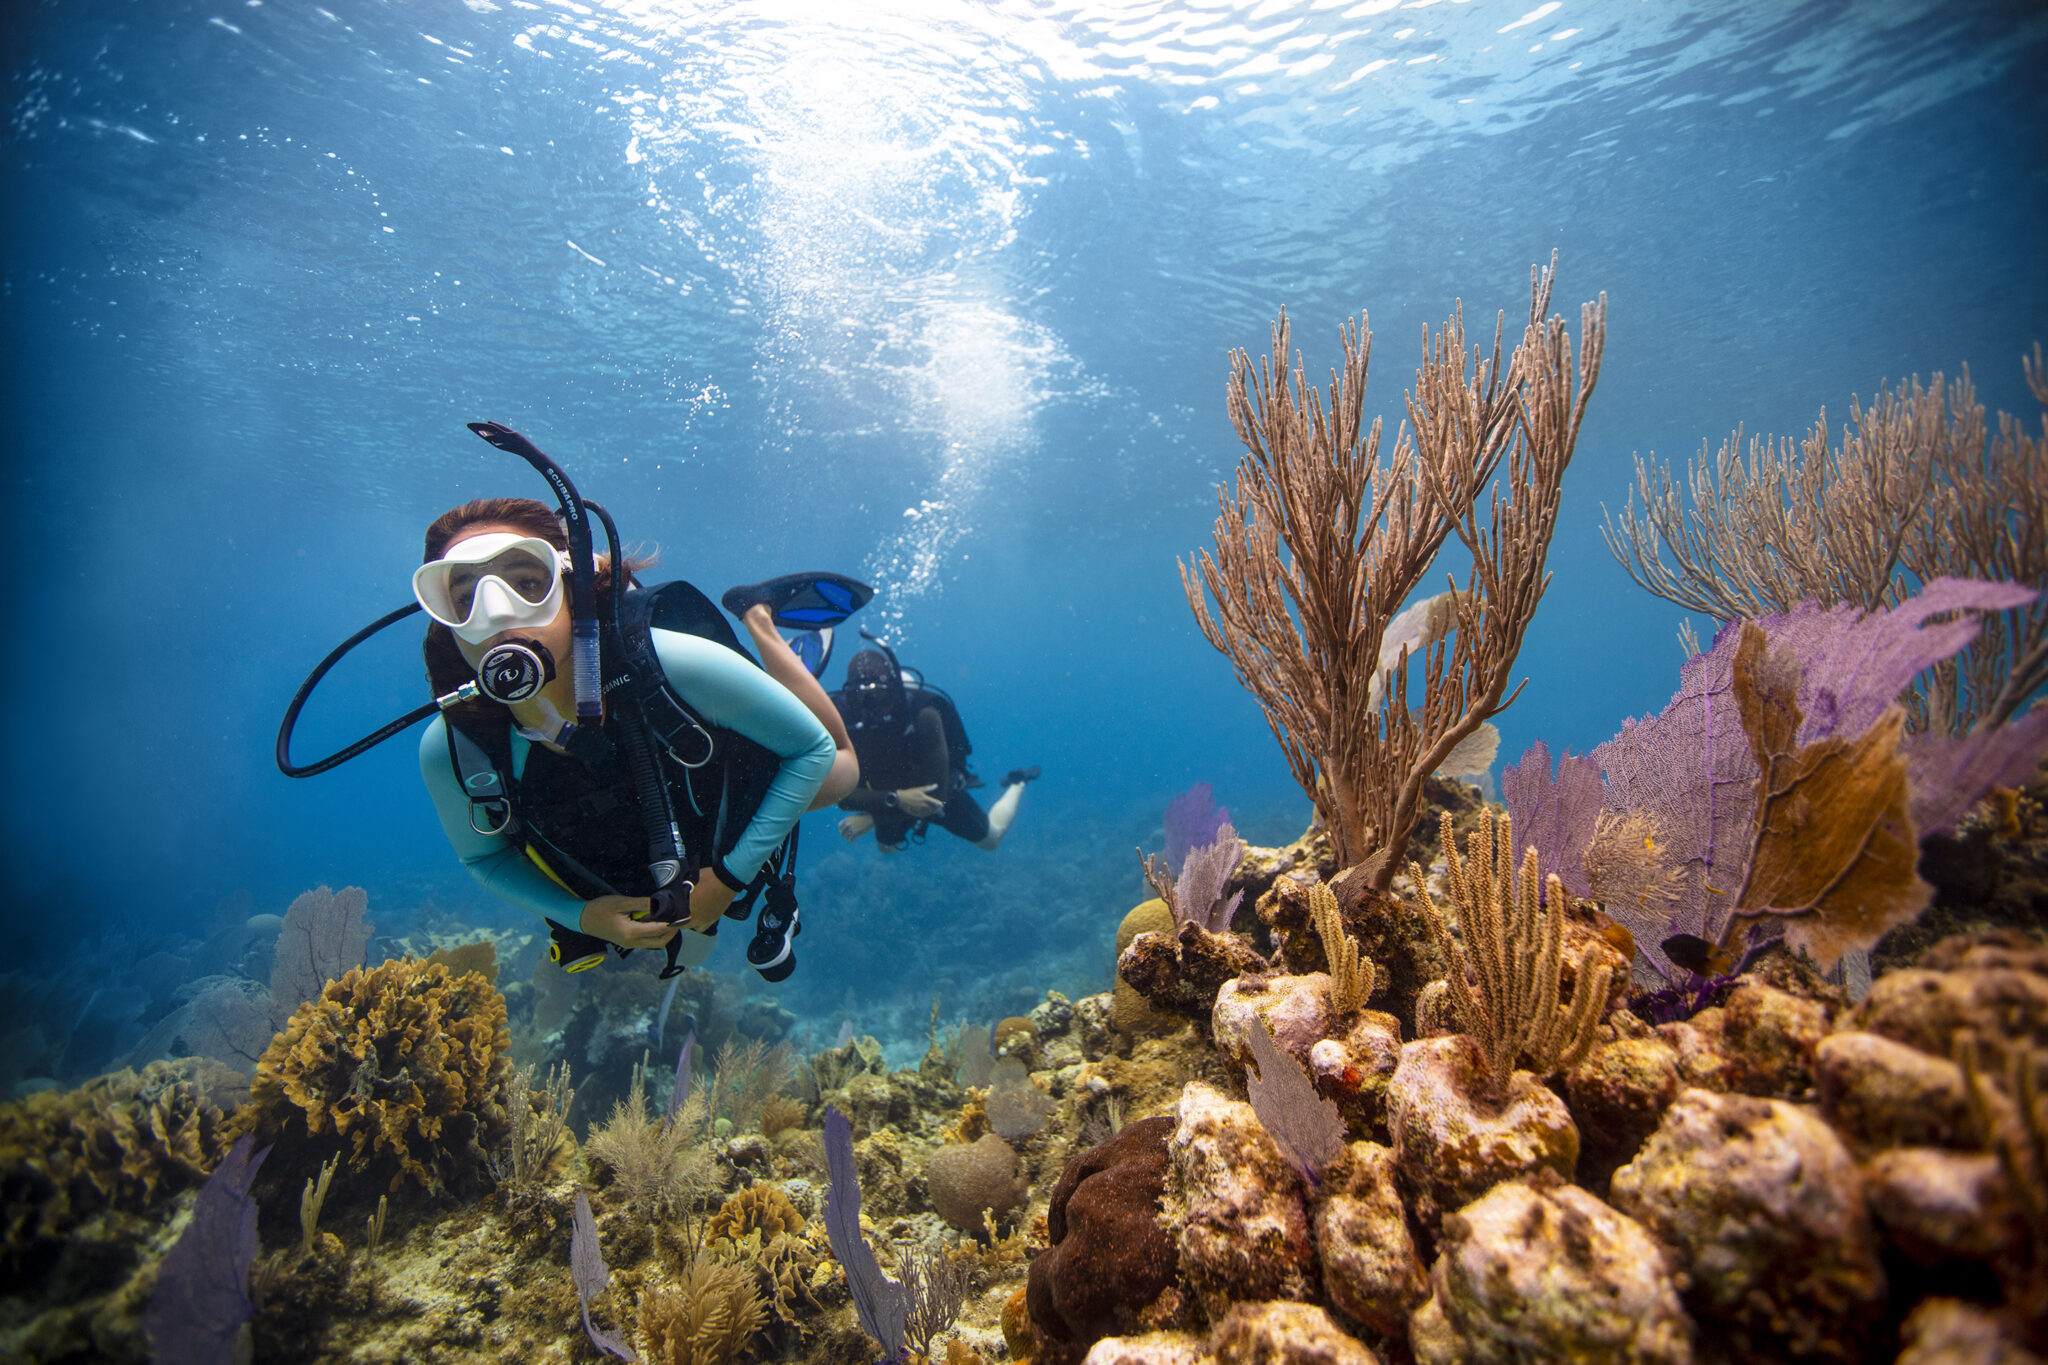 Two scuba divers underwater, enjoying an activity which raises an important question: is it correct to say dived or dove?